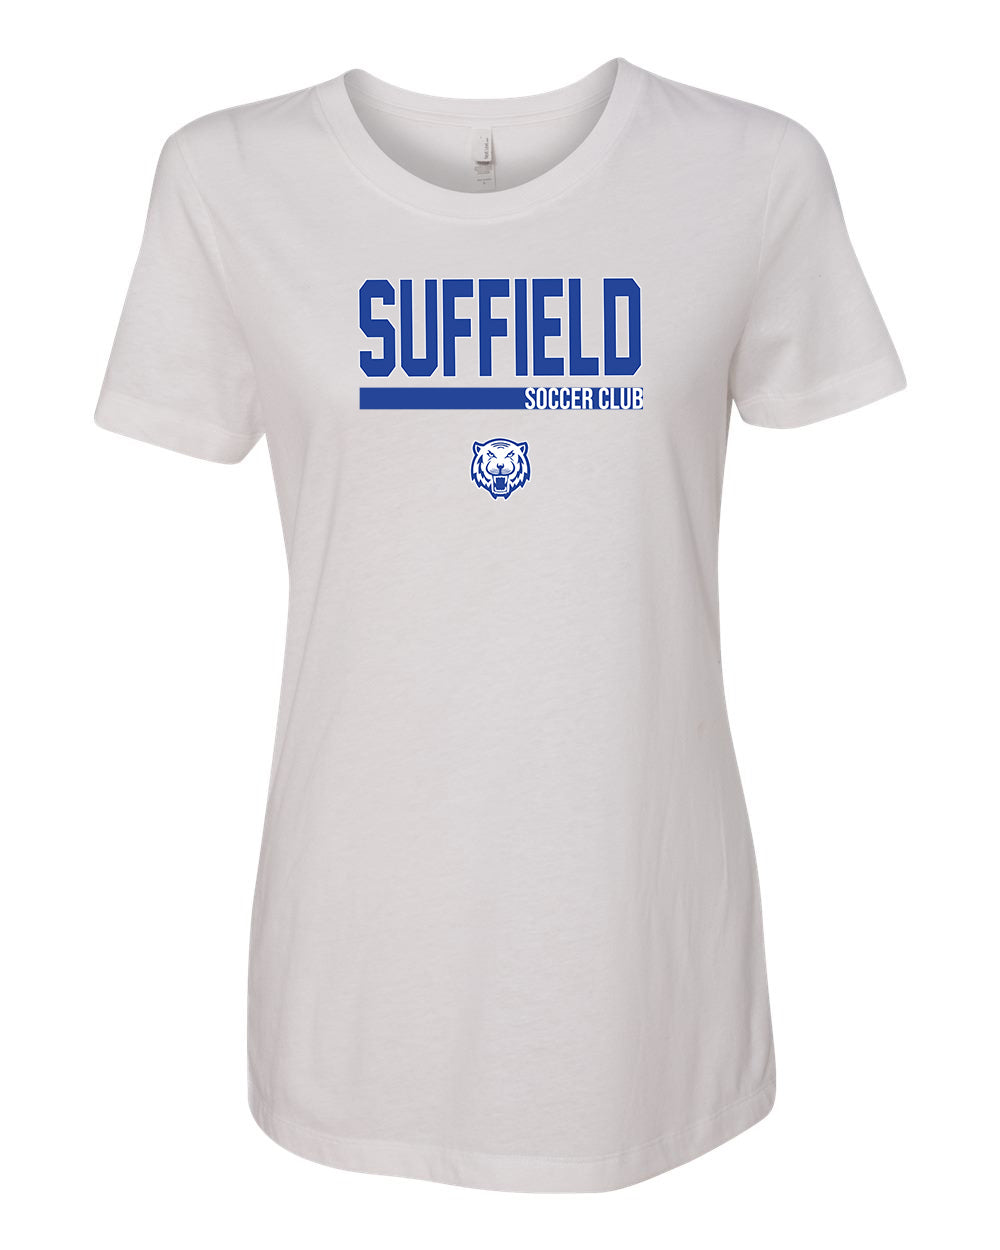 Suffield Soccer Club Ladies T-shirt "TWR" - 1510 (color options available)